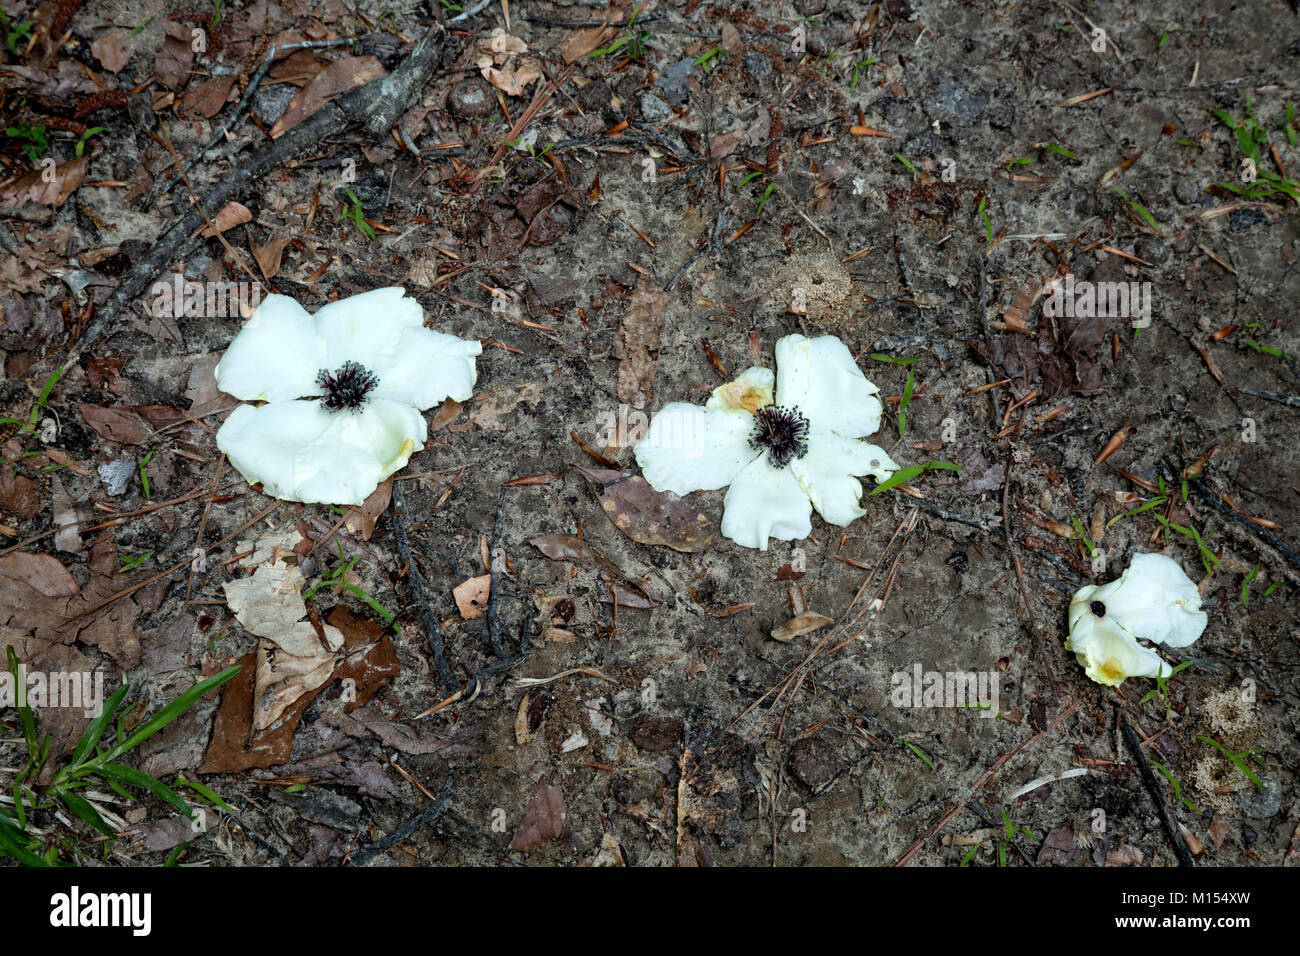 NC01477-00...NORTH CAROLINA - Blossoms from a dogwood tree on the ground at a backcountry campsite in Merchant Millpond State Park. Stock Photo